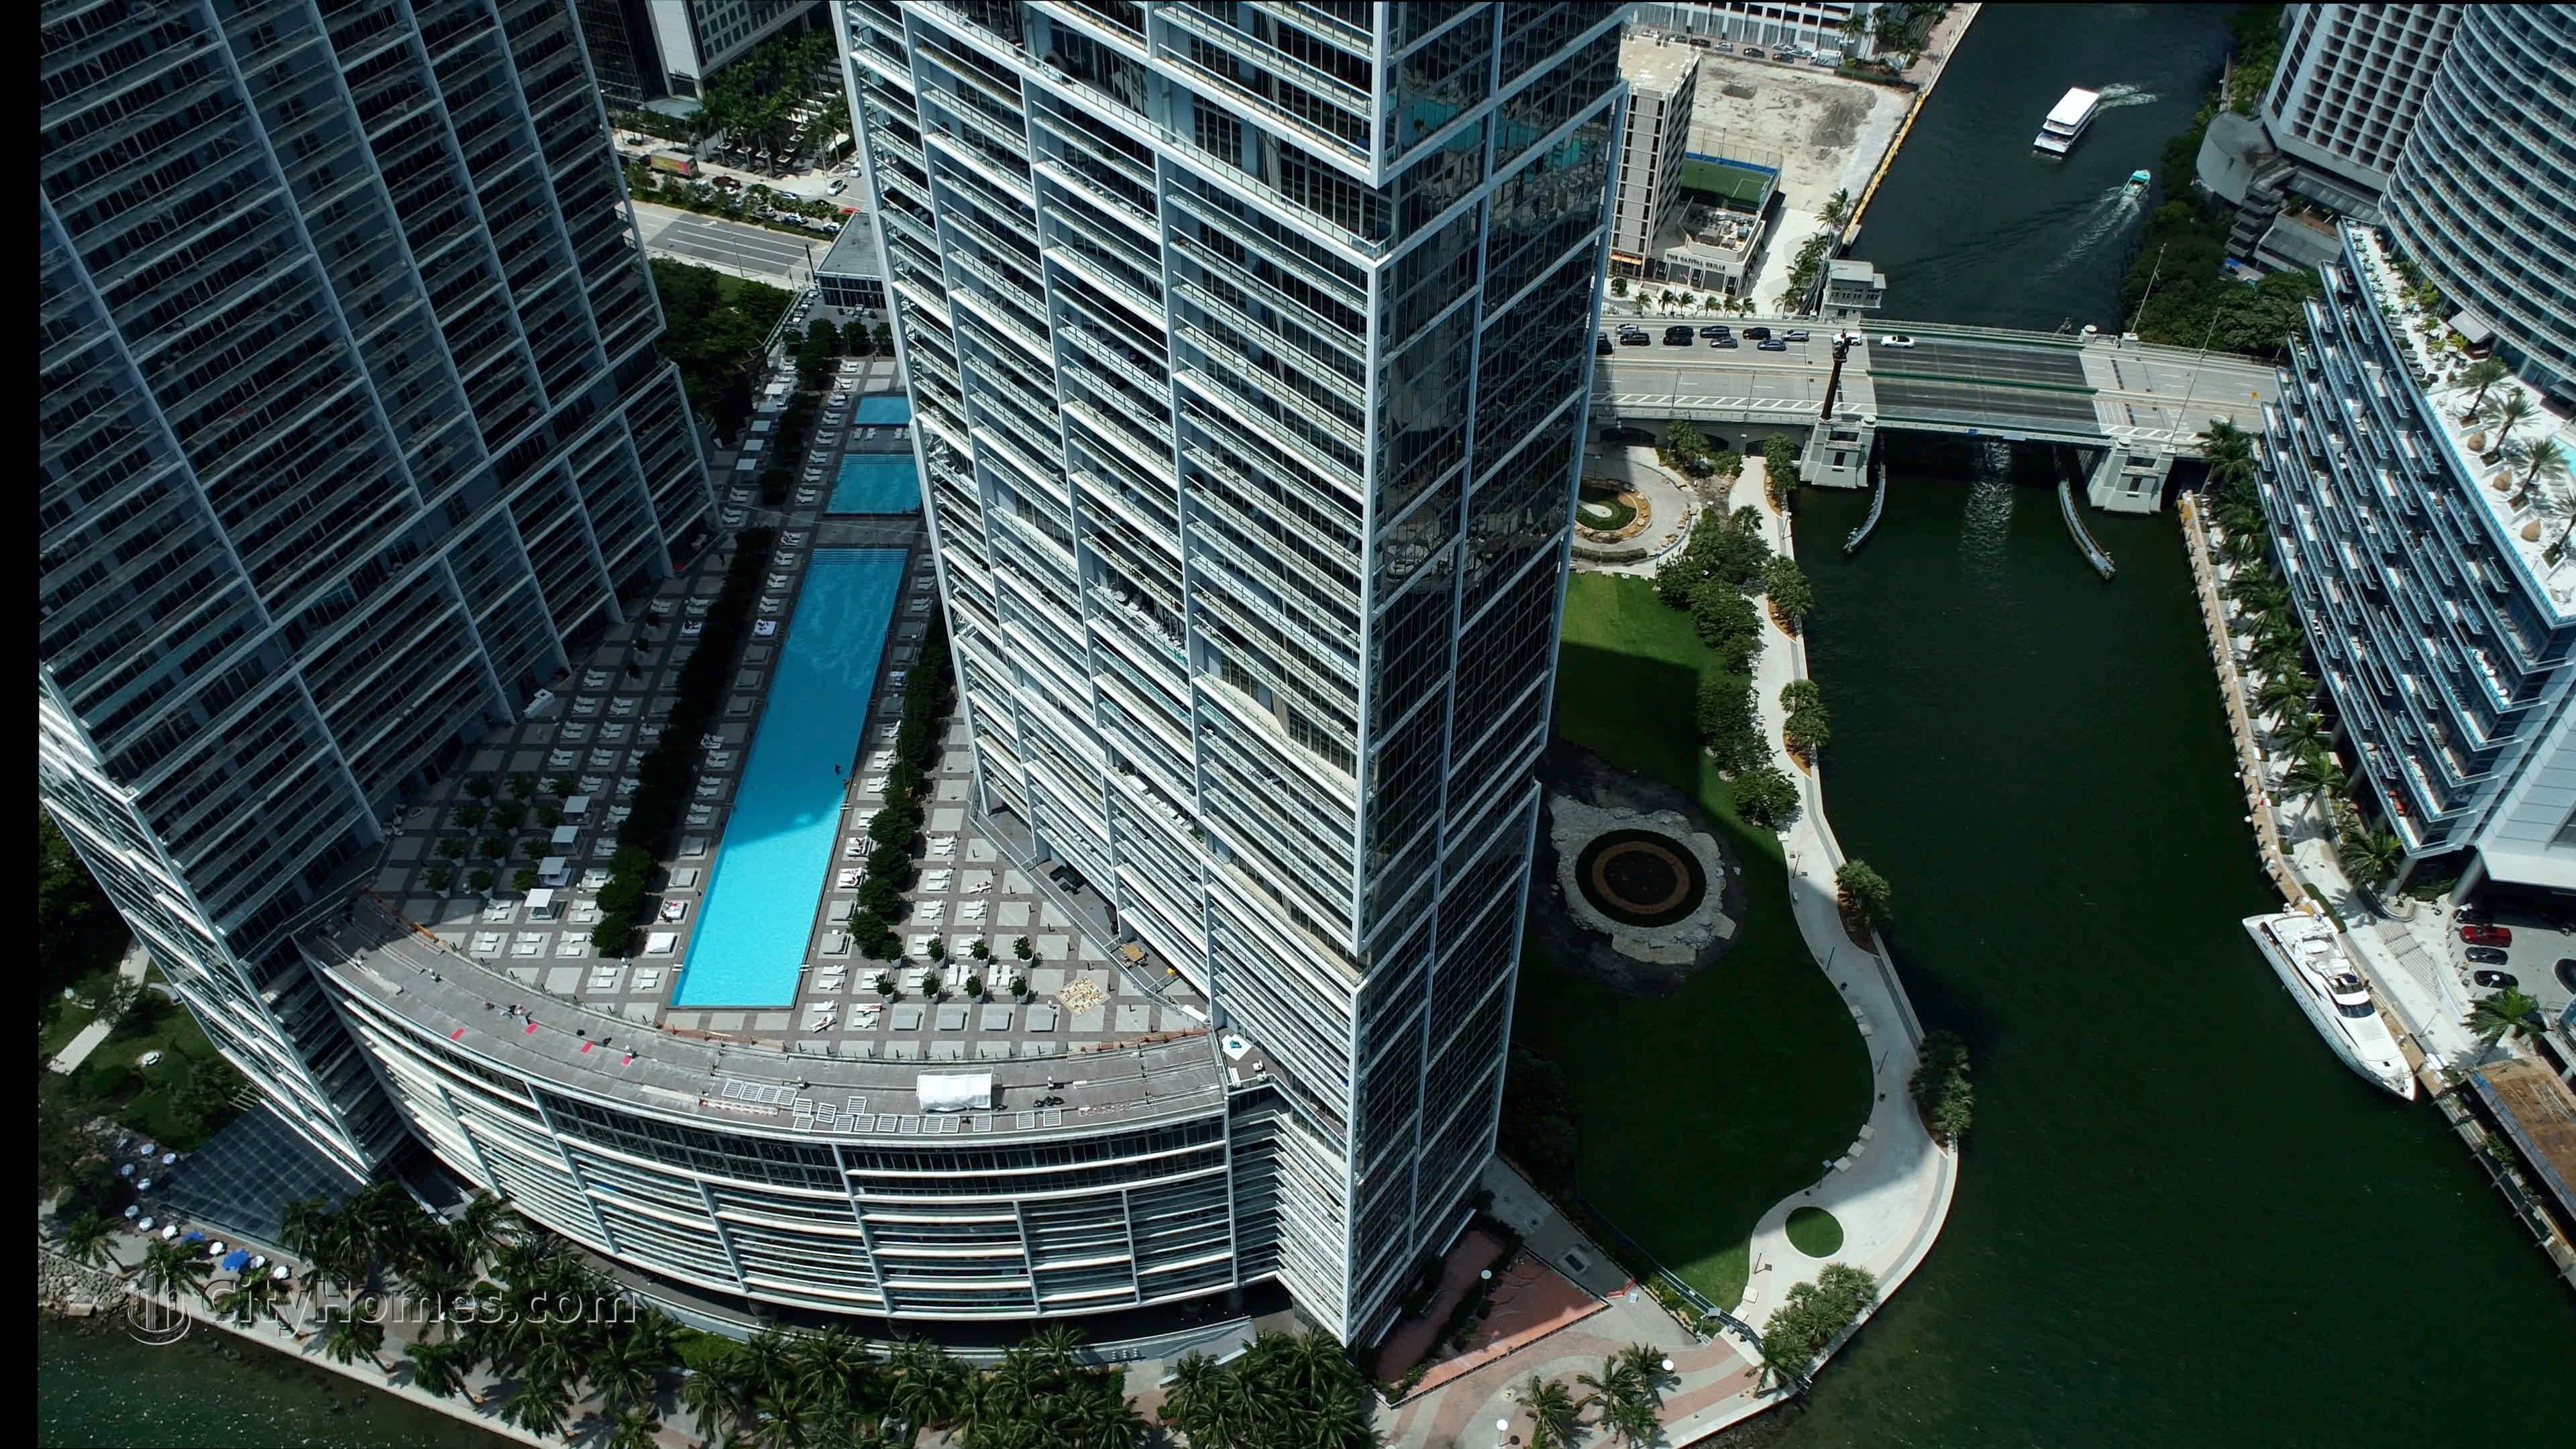 4. ICON Brickell Tower 1 κτίριο σε 465 And 475 Brickell Ave, Miami, FL 33131